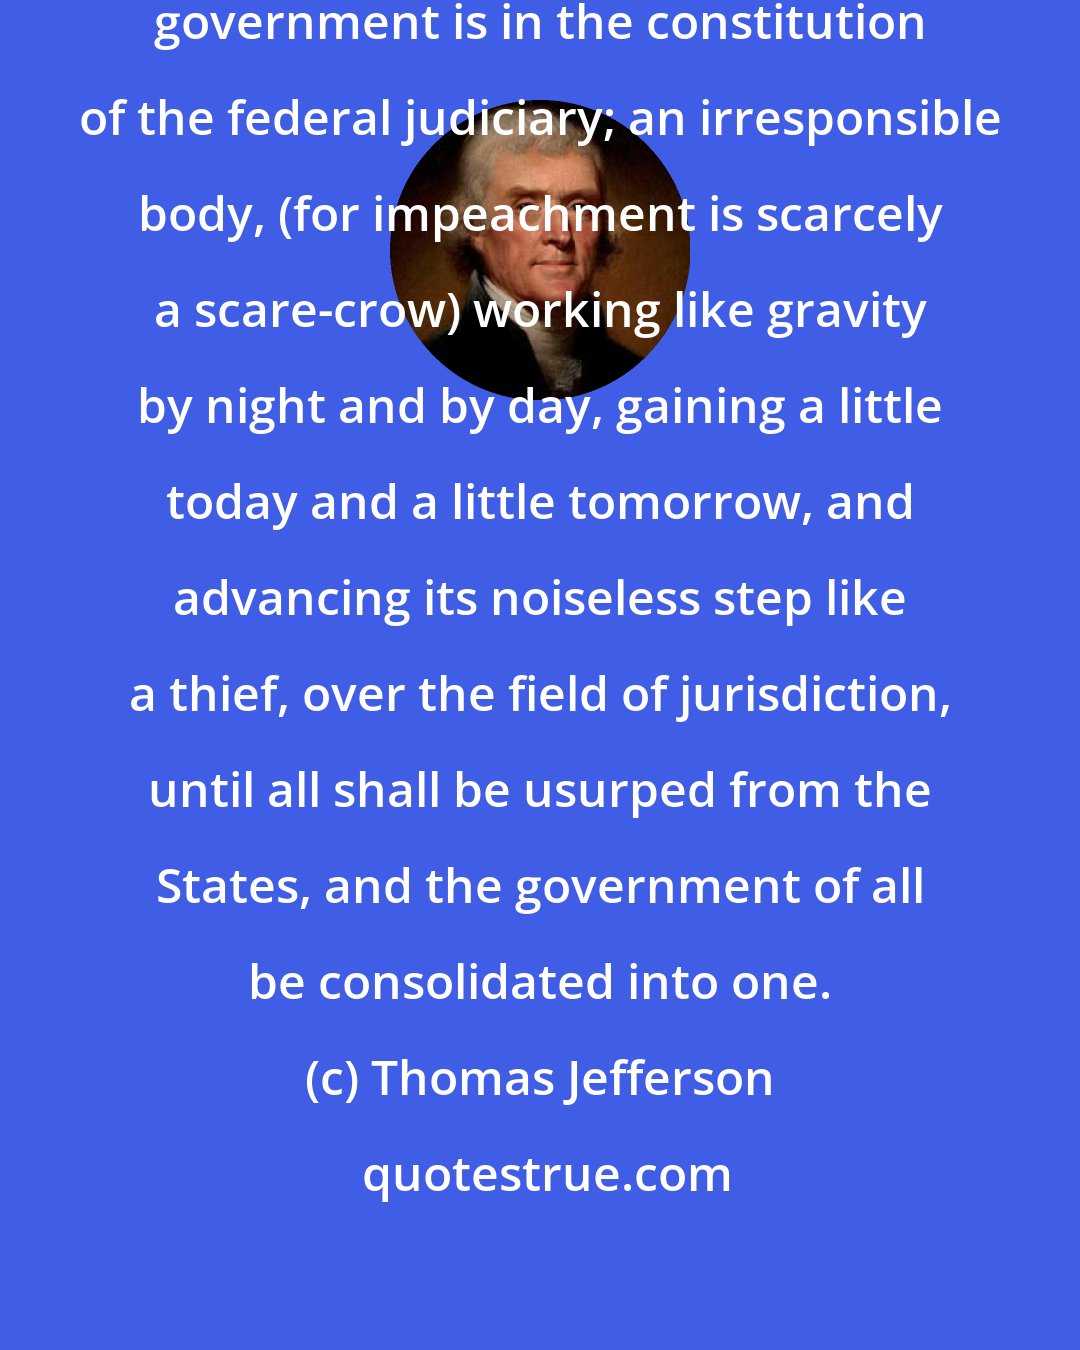 Thomas Jefferson: The germ of dissolution of our federal government is in the constitution of the federal judiciary; an irresponsible body, (for impeachment is scarcely a scare-crow) working like gravity by night and by day, gaining a little today and a little tomorrow, and advancing its noiseless step like a thief, over the field of jurisdiction, until all shall be usurped from the States, and the government of all be consolidated into one.